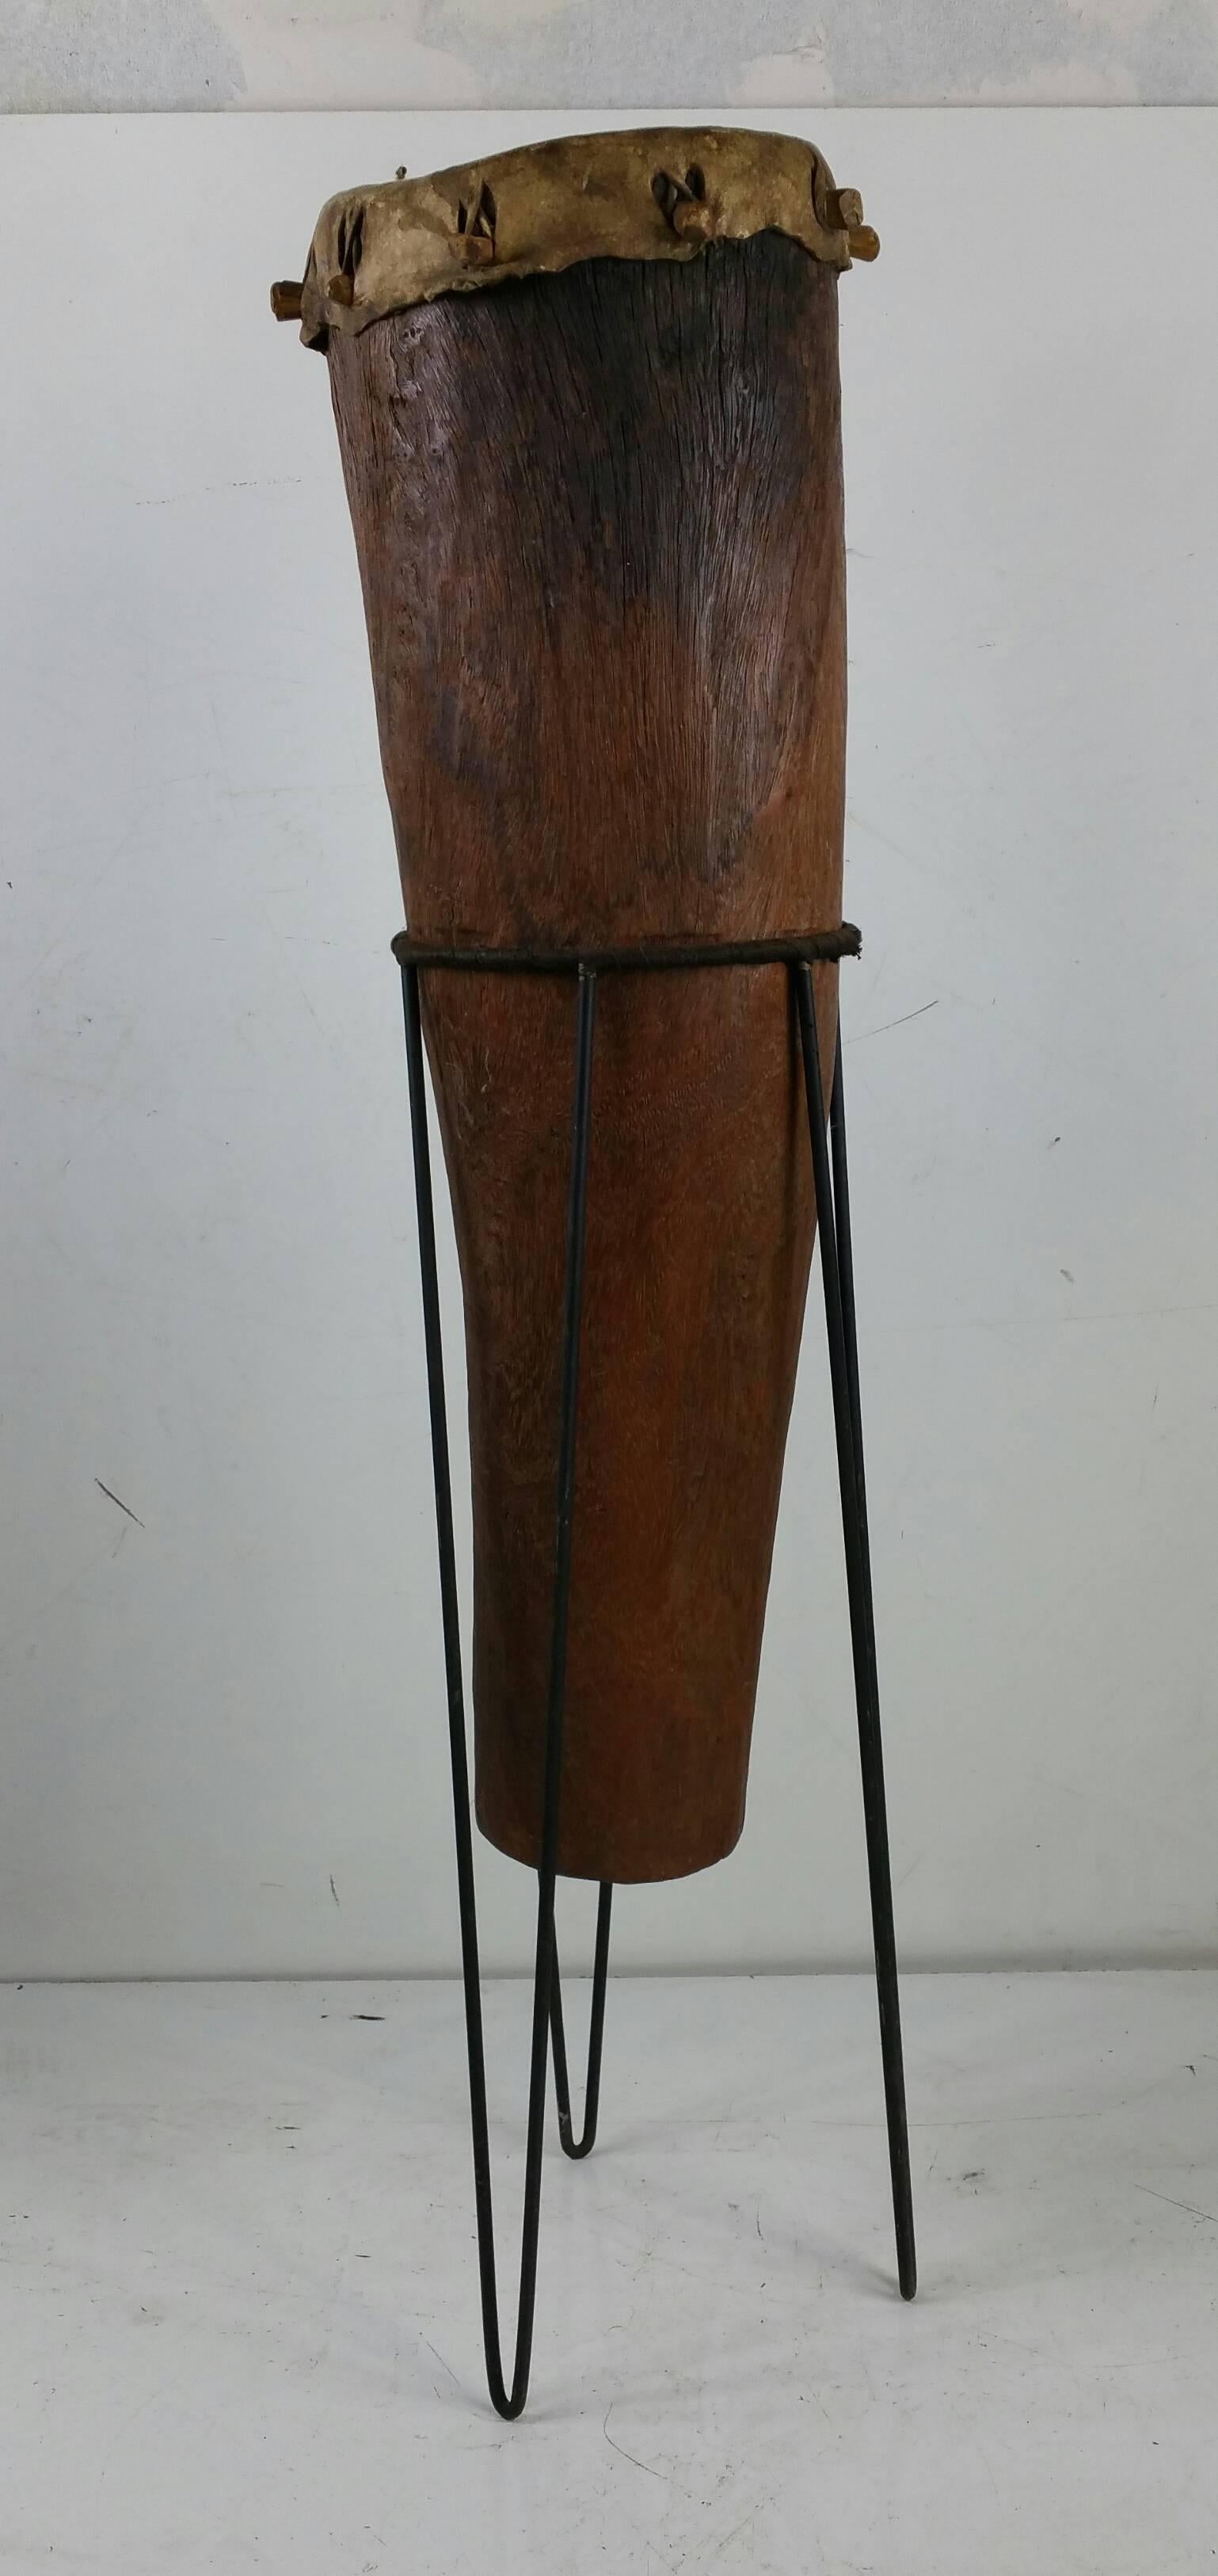 Early African Drum,, Hand made,,Modernist iron stand,, Functional,,amazing sound as well as beautiful sculpture.